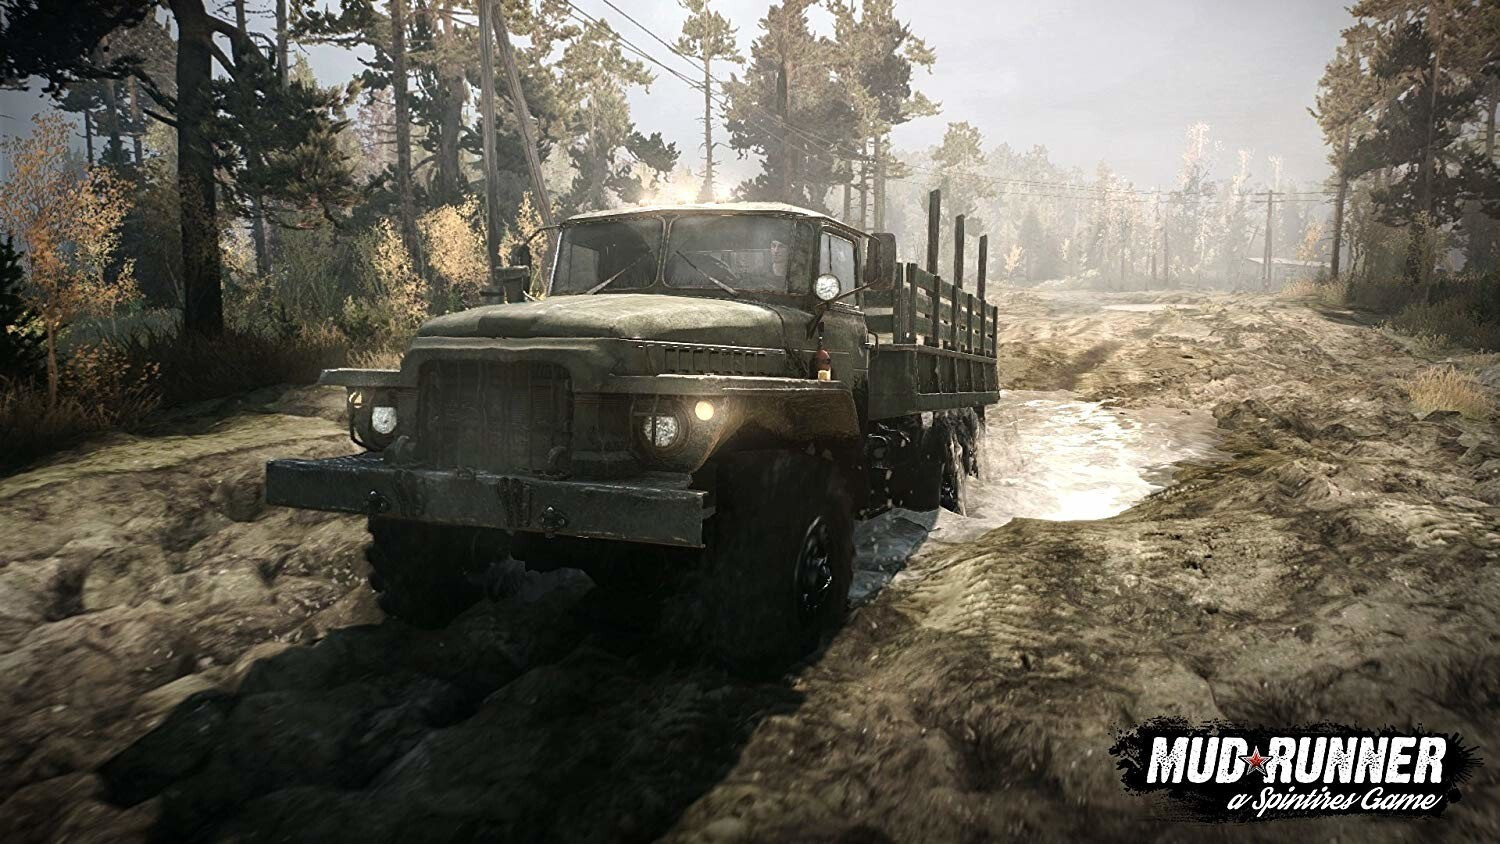 ps4 mudrunner review